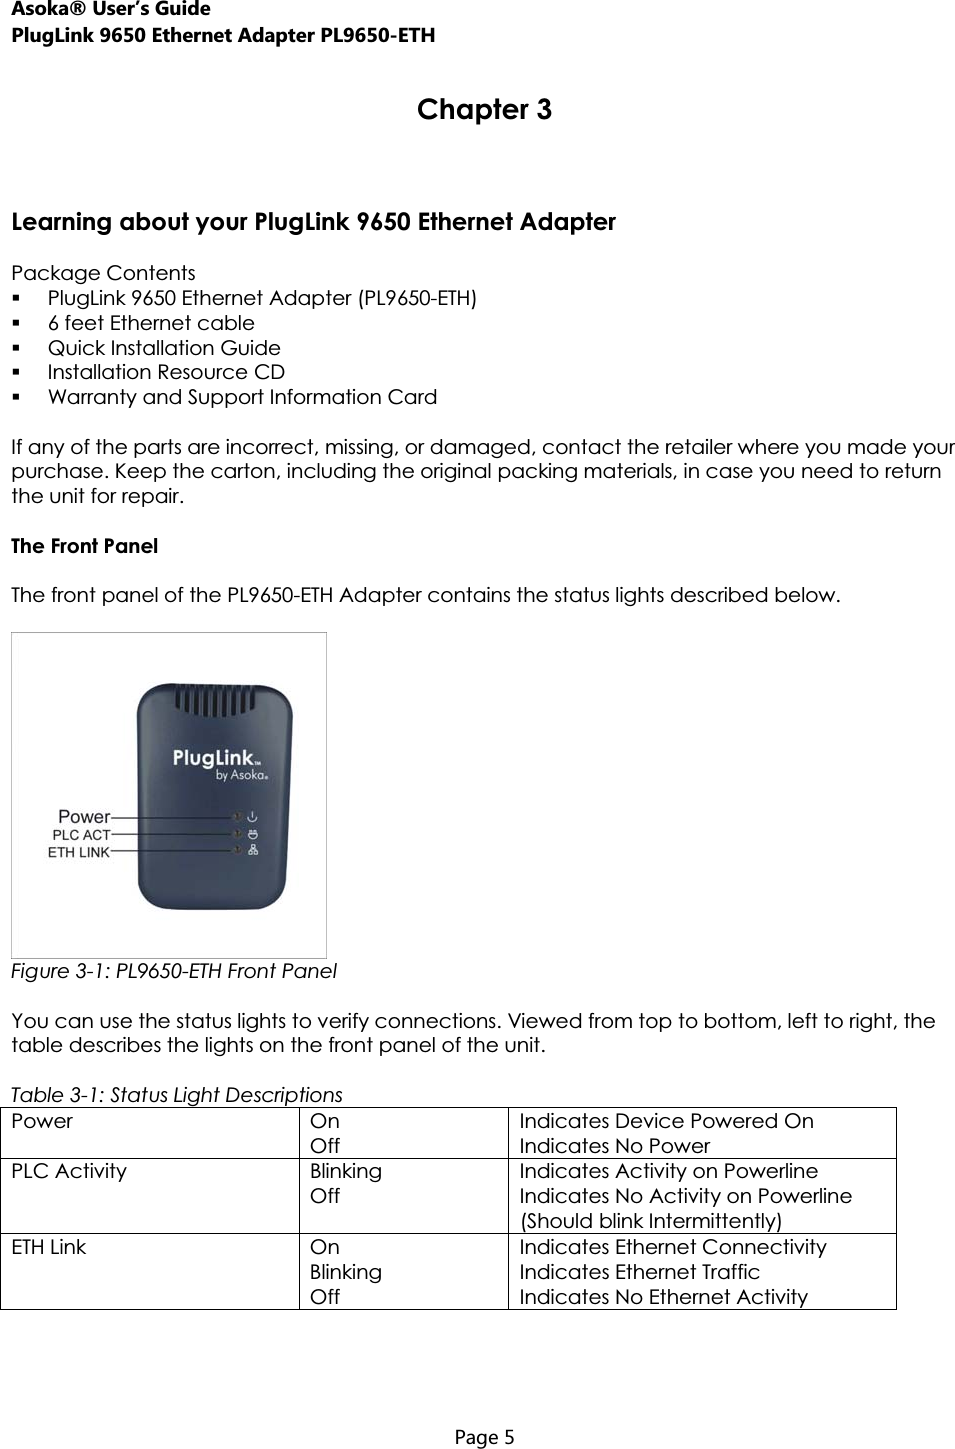 Asoka® User’s Guide PlugLink 9650 Ethernet Adapter PL9650-ETH  Page 5  Chapter 3 Learning about your PlugLink 9650 Ethernet Adapter Package Contents PlugLink 9650 Ethernet Adapter (PL9650-ETH) 6 feet Ethernet cable Quick Installation Guide Installation Resource CD Warranty and Support Information Card If any of the parts are incorrect, missing, or damaged, contact the retailer where you made your purchase. Keep the carton, including the original packing materials, in case you need to return the unit for repair.  The Front Panel The front panel of the PL9650-ETH Adapter contains the status lights described below. Figure 3-1: PL9650-ETH Front Panel You can use the status lights to verify connections. Viewed from top to bottom, left to right, the table describes the lights on the front panel of the unit. Table 3-1: Status Light Descriptions Power On Off Indicates Device Powered On Indicates No Power PLC Activity  Blinking Off Indicates Activity on Powerline Indicates No Activity on Powerline (Should blink Intermittently) ETH Link  On Blinking Off Indicates Ethernet Connectivity Indicates Ethernet Traffic Indicates No Ethernet Activity 